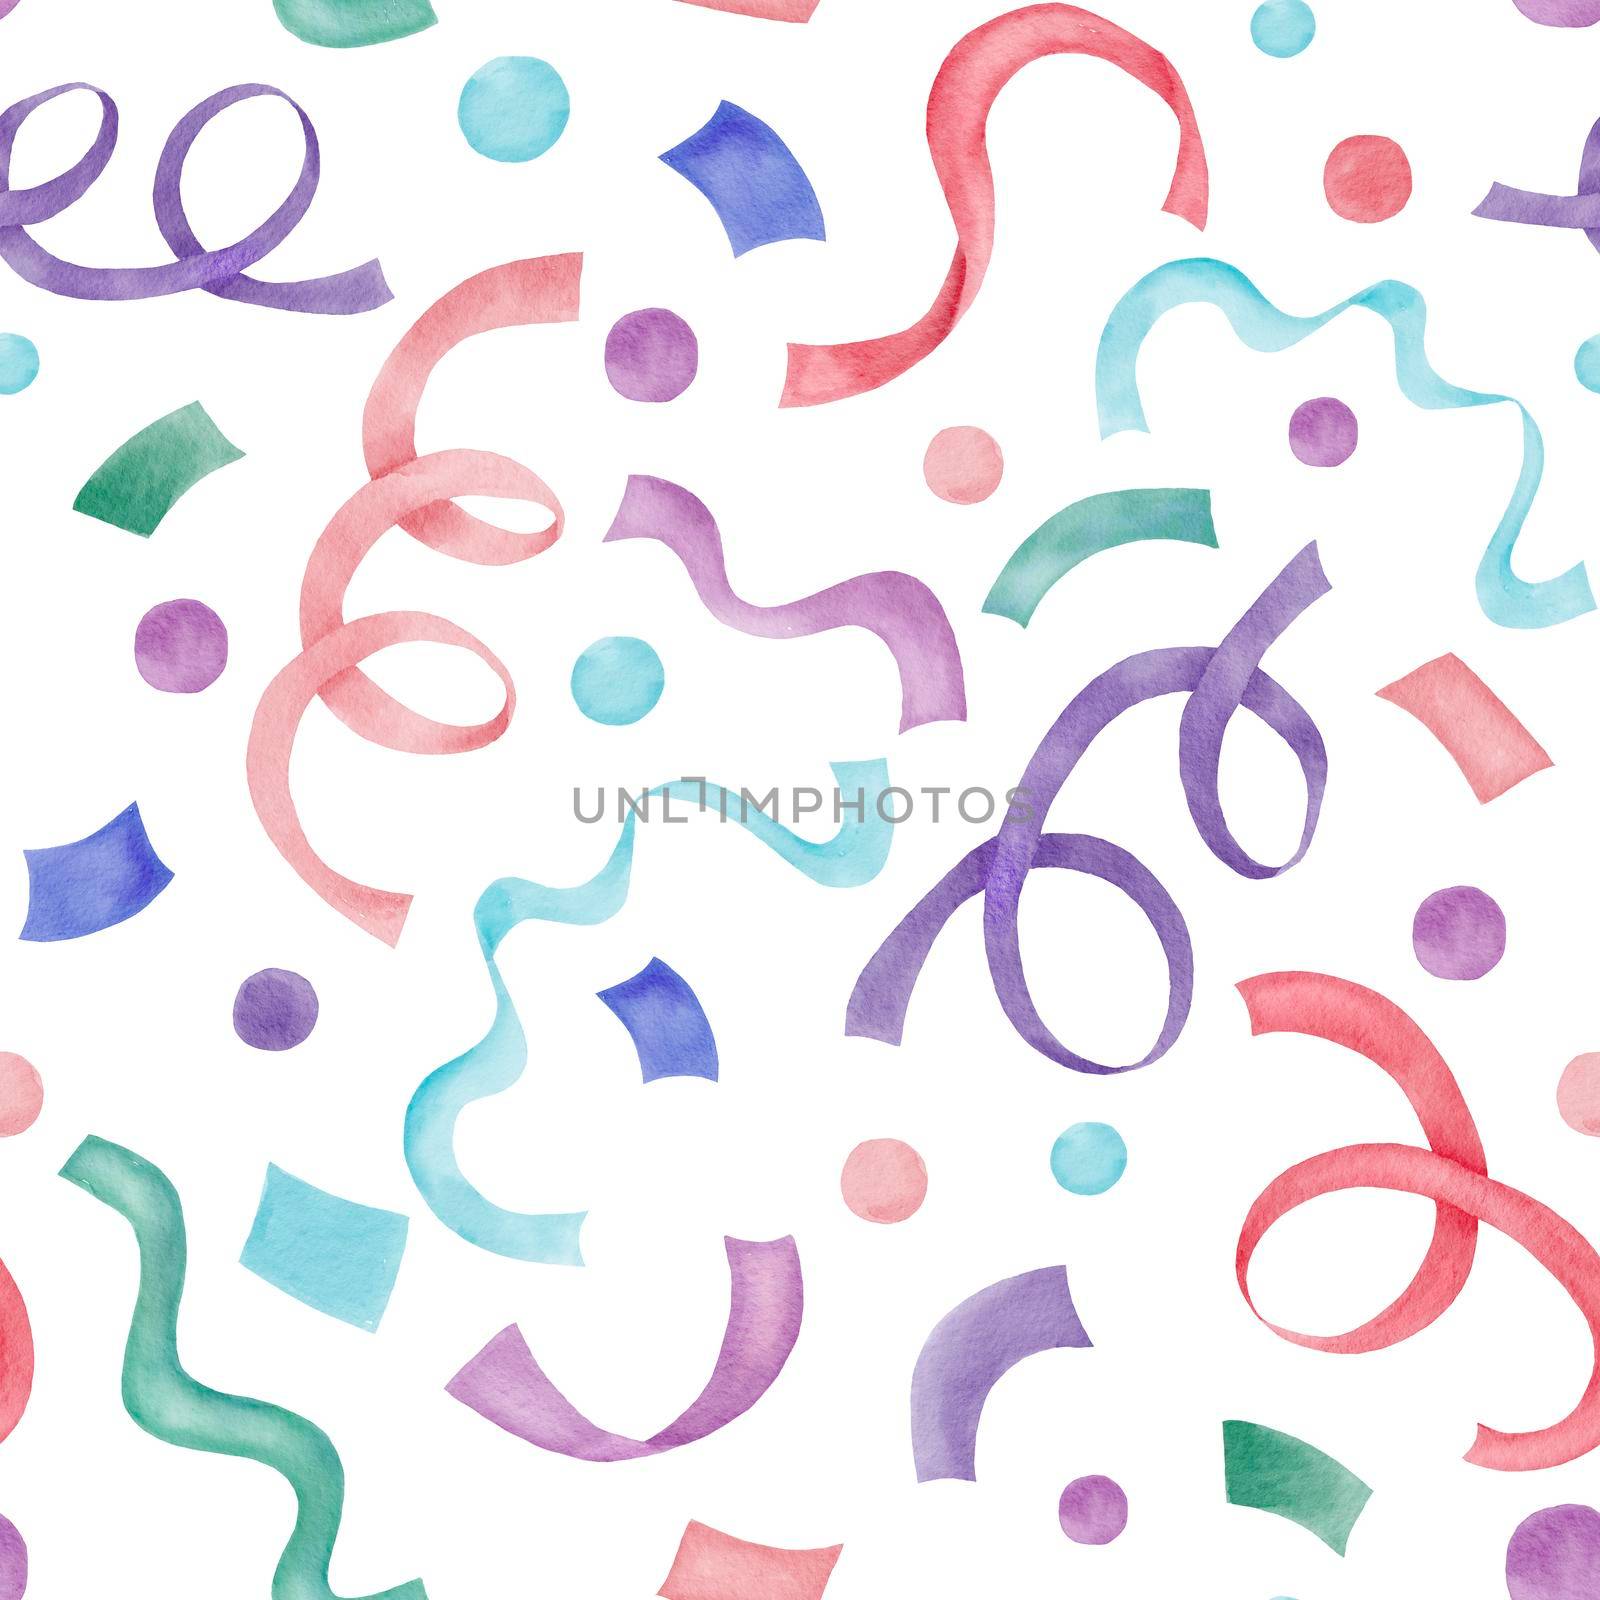 Colorful multicolored seamless pattern of confetti and party ribbons. Hand drawn drawing isolated on white background